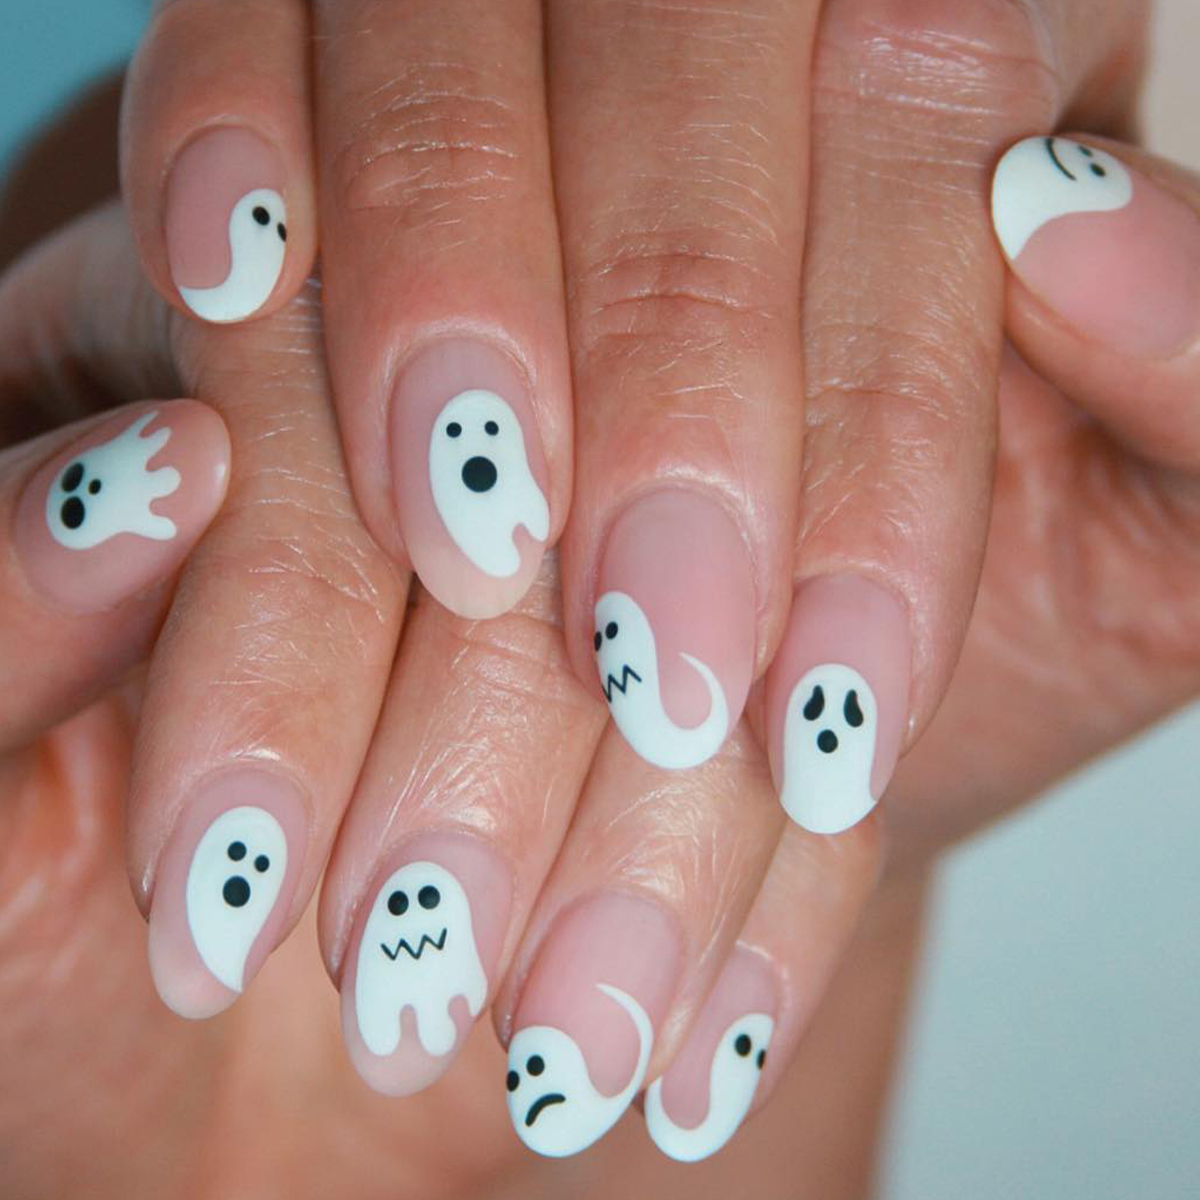 25 Festive Halloween Nail Designs We Can't Stop Looking At | Who What Wear